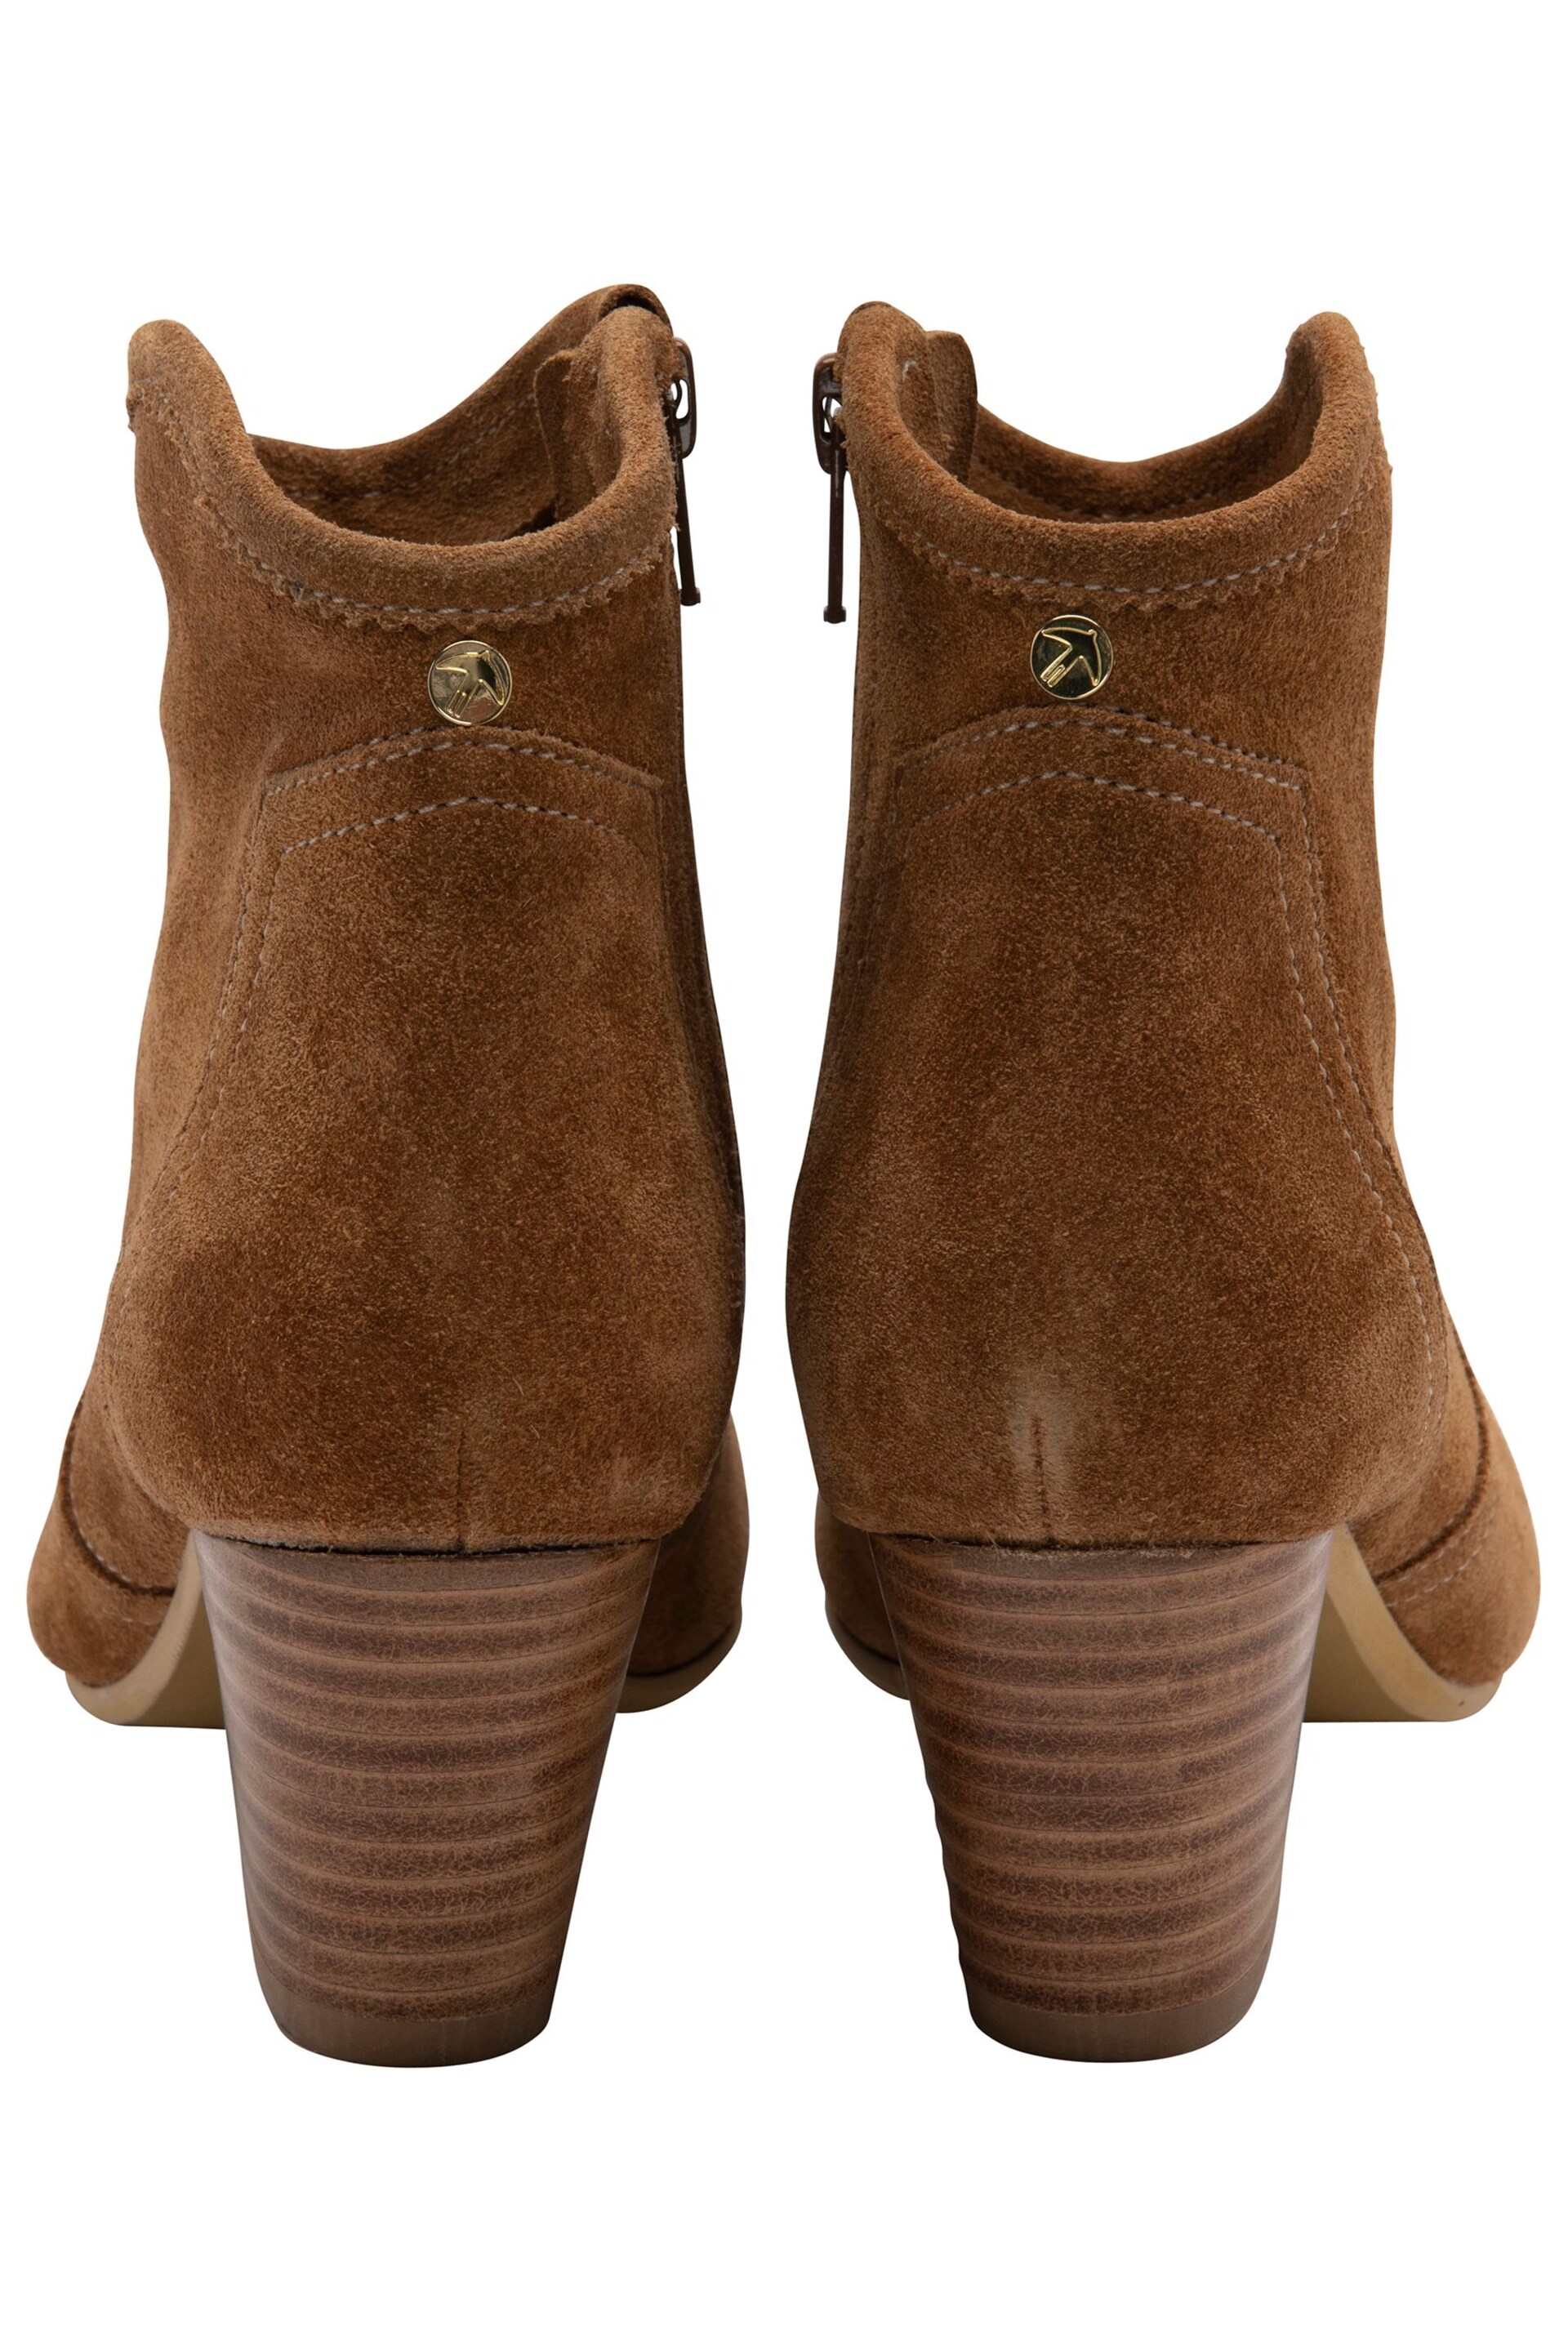 Ravel Brown Suede Leather Block Heel Ankle Boots - Image 3 of 4